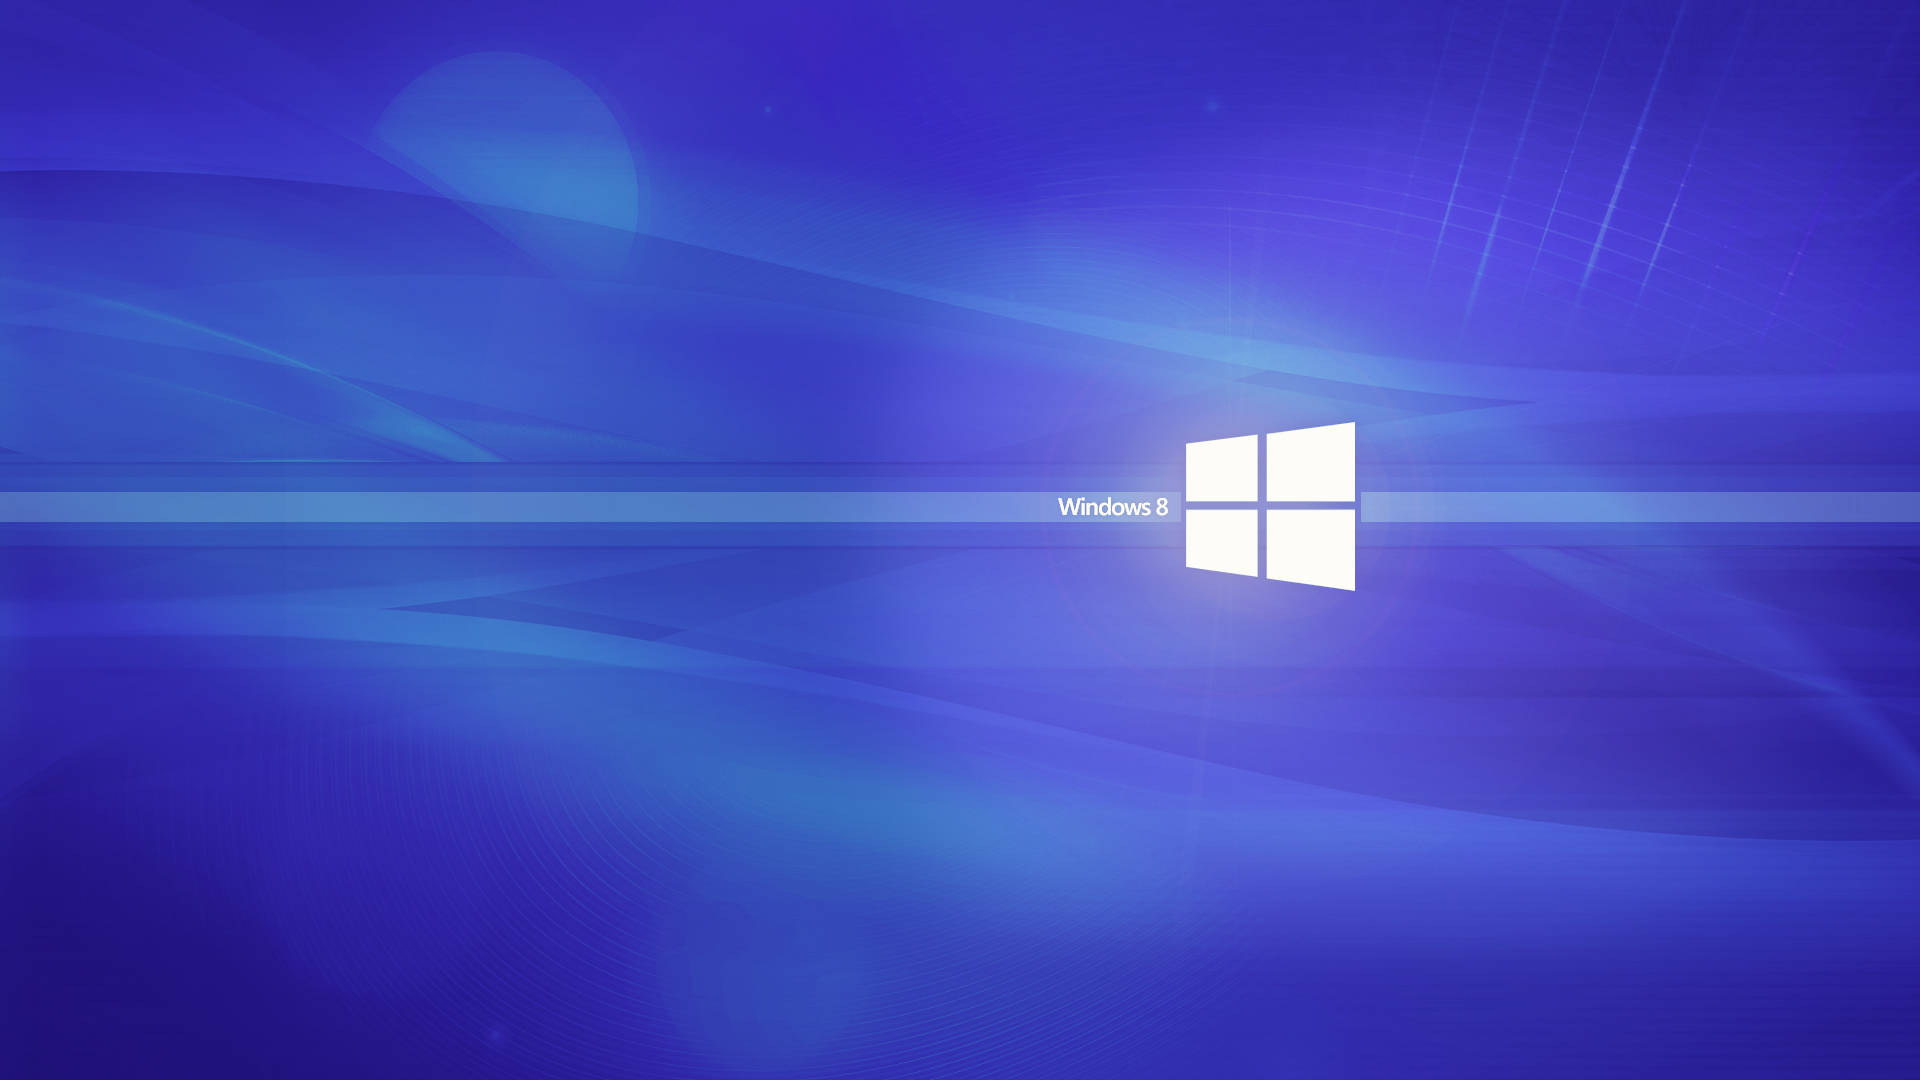 Glowing Blue Abstract Windows 8 Background Wallpaper